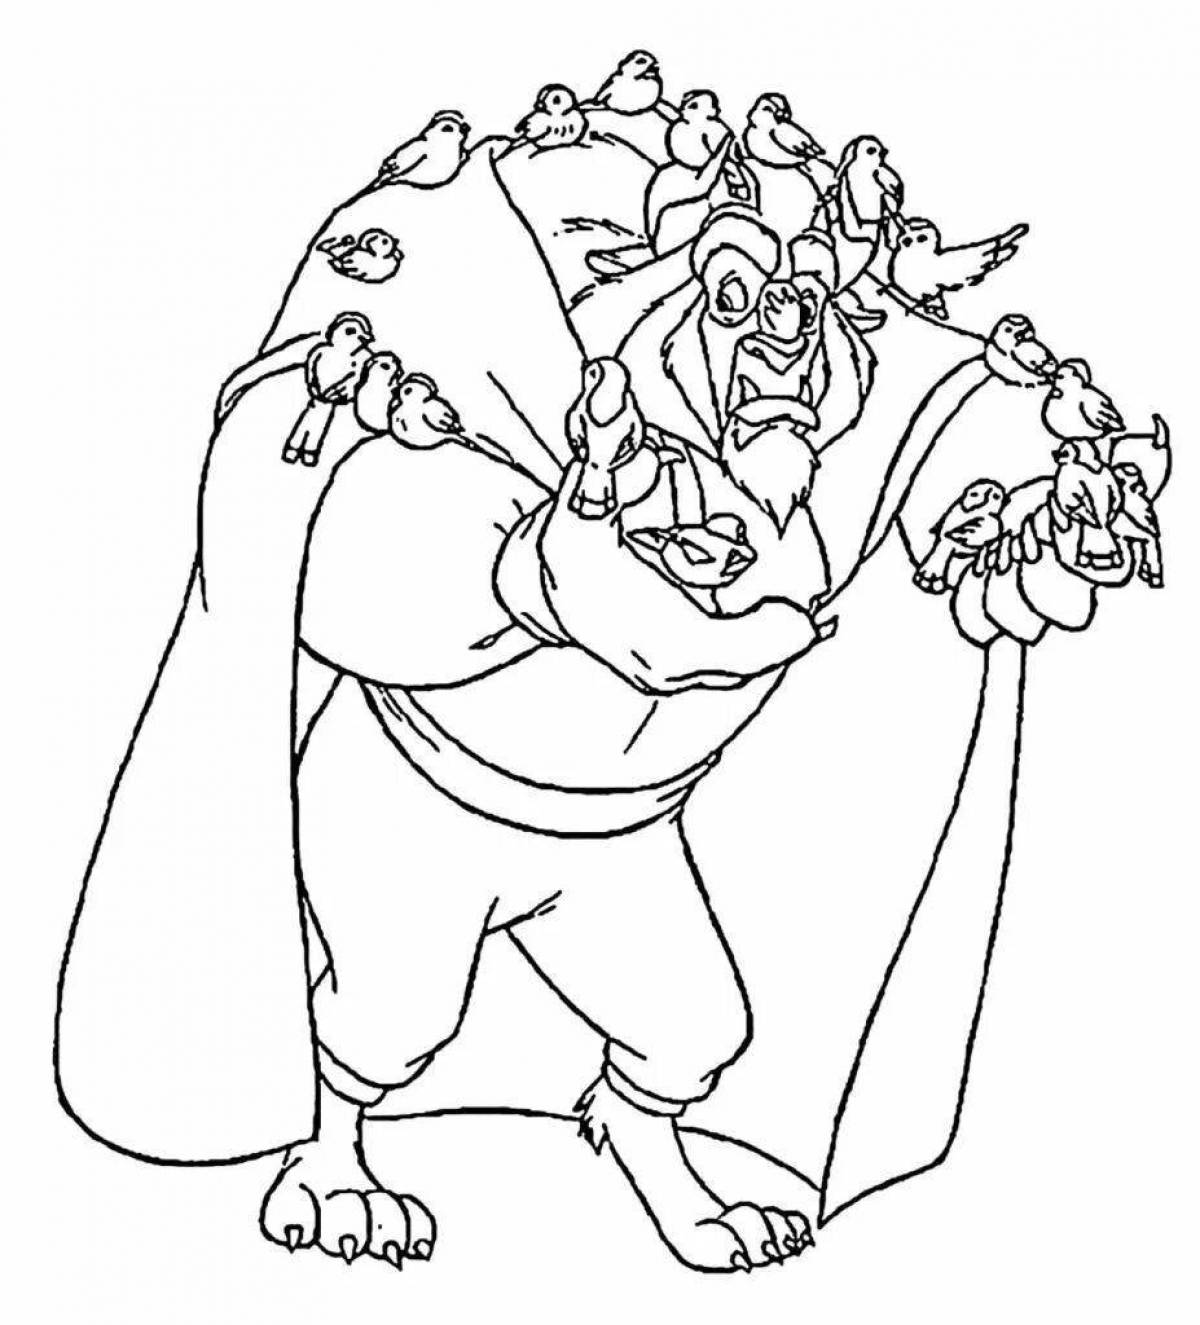 A fascinating beauty and the beast coloring book for kids